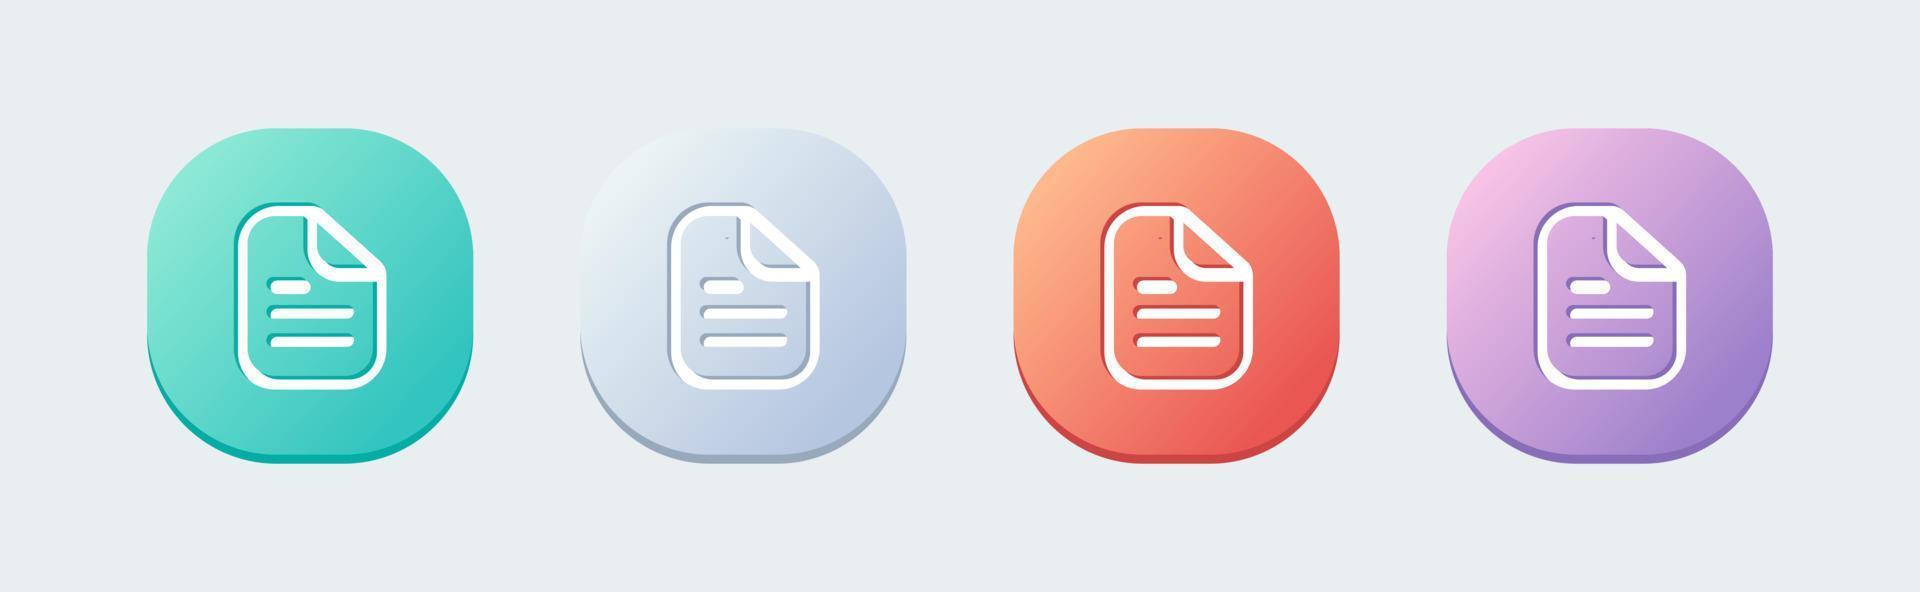 Document line icon in flat design style. Folded written paper vector icon.